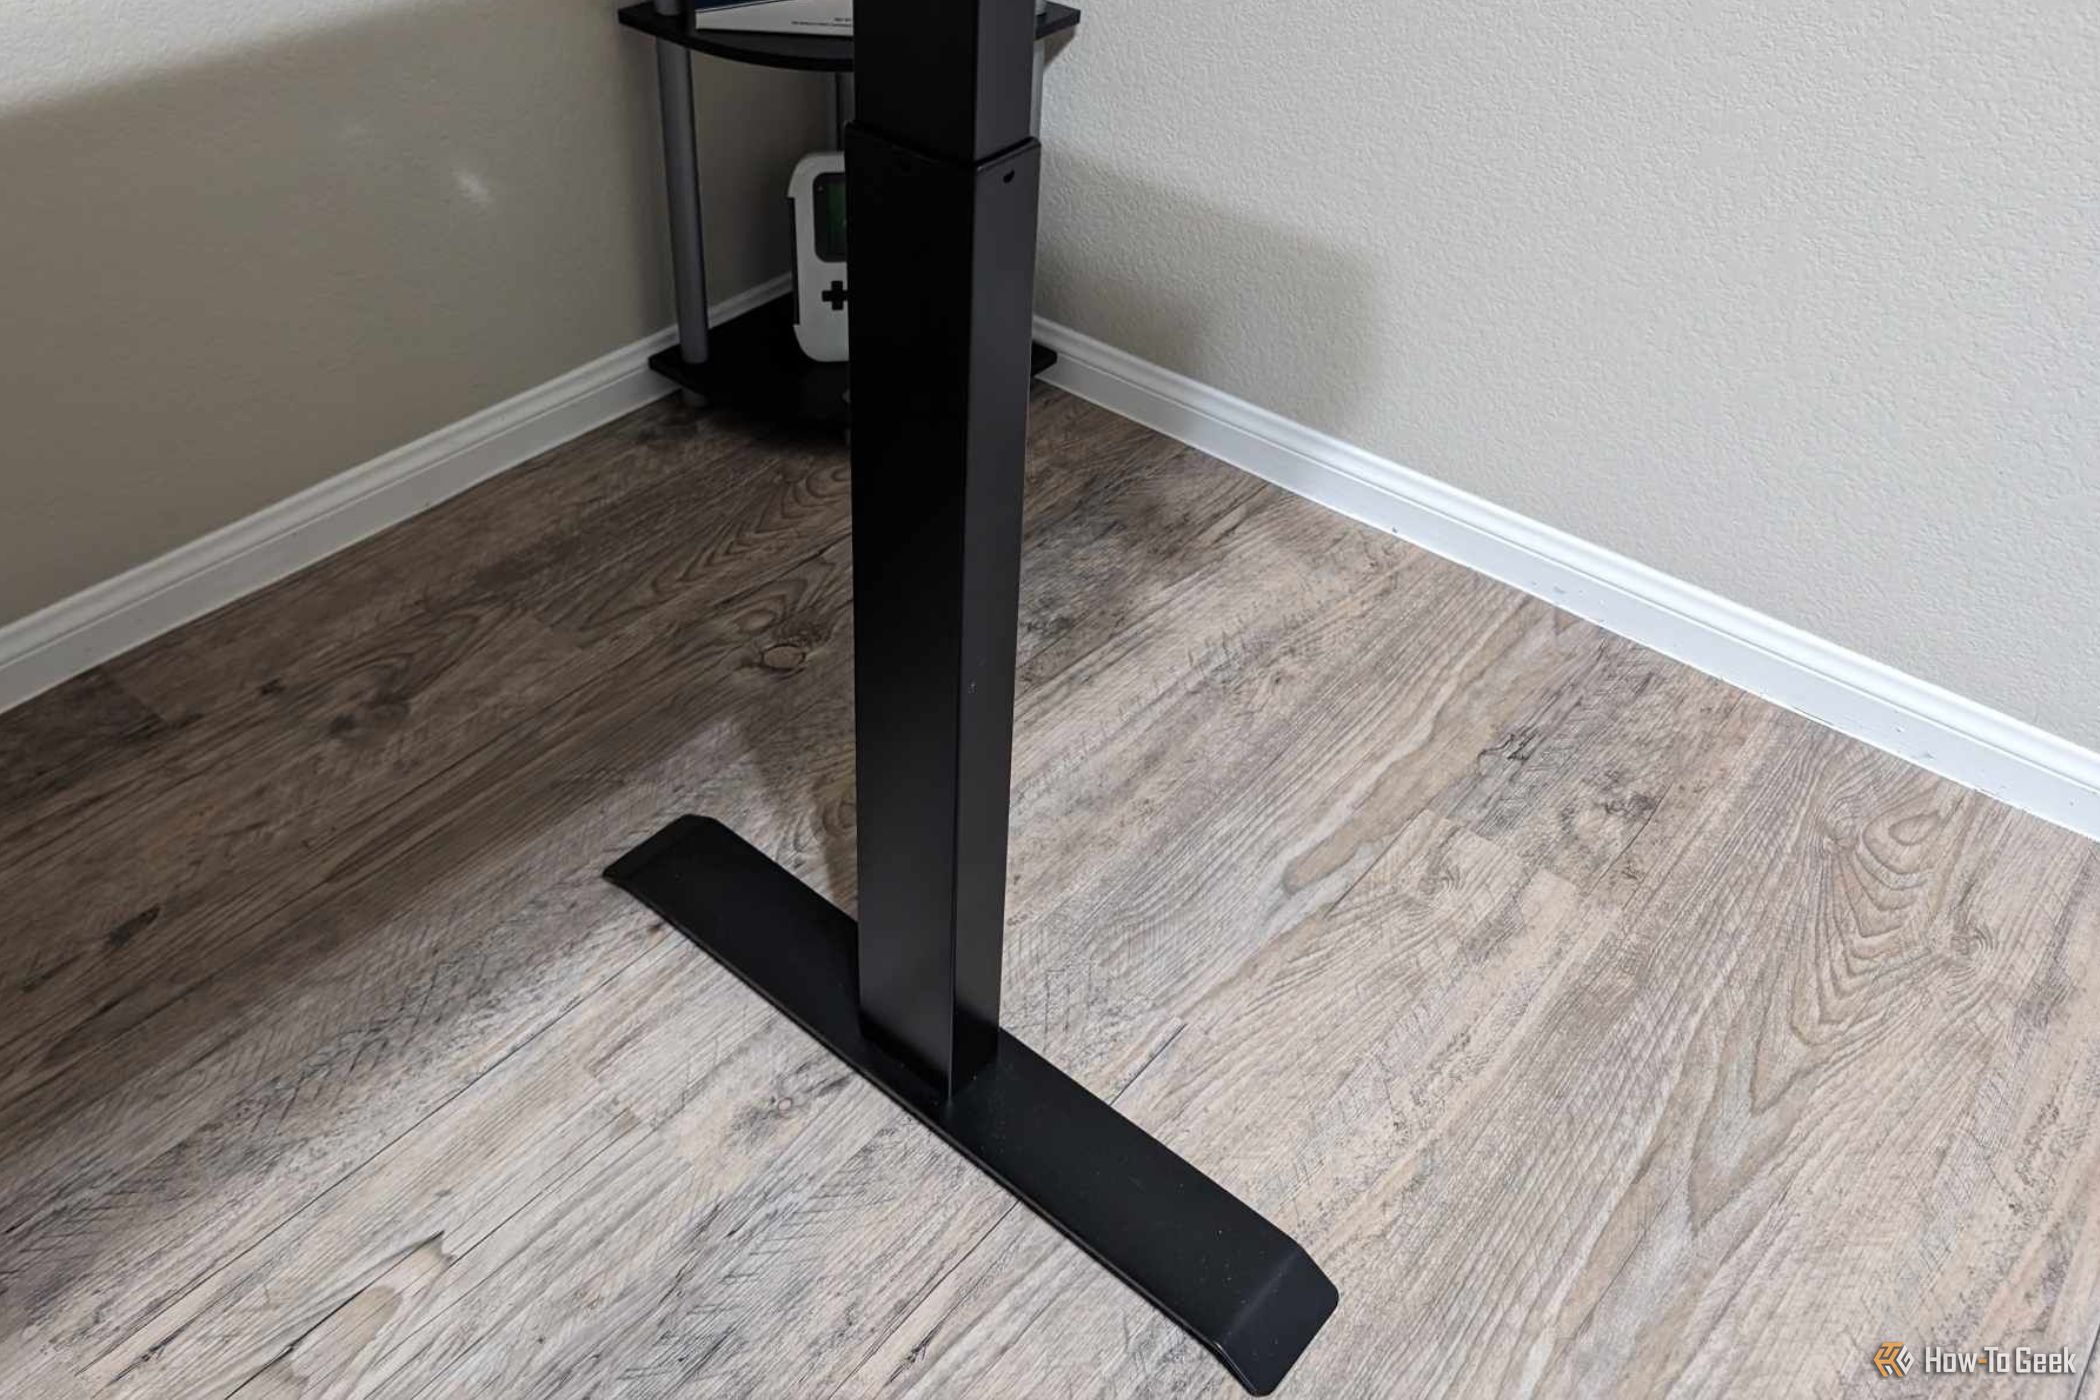 AndaSeat FlyQuest Edition Gaming Standing Desk leg at full extension